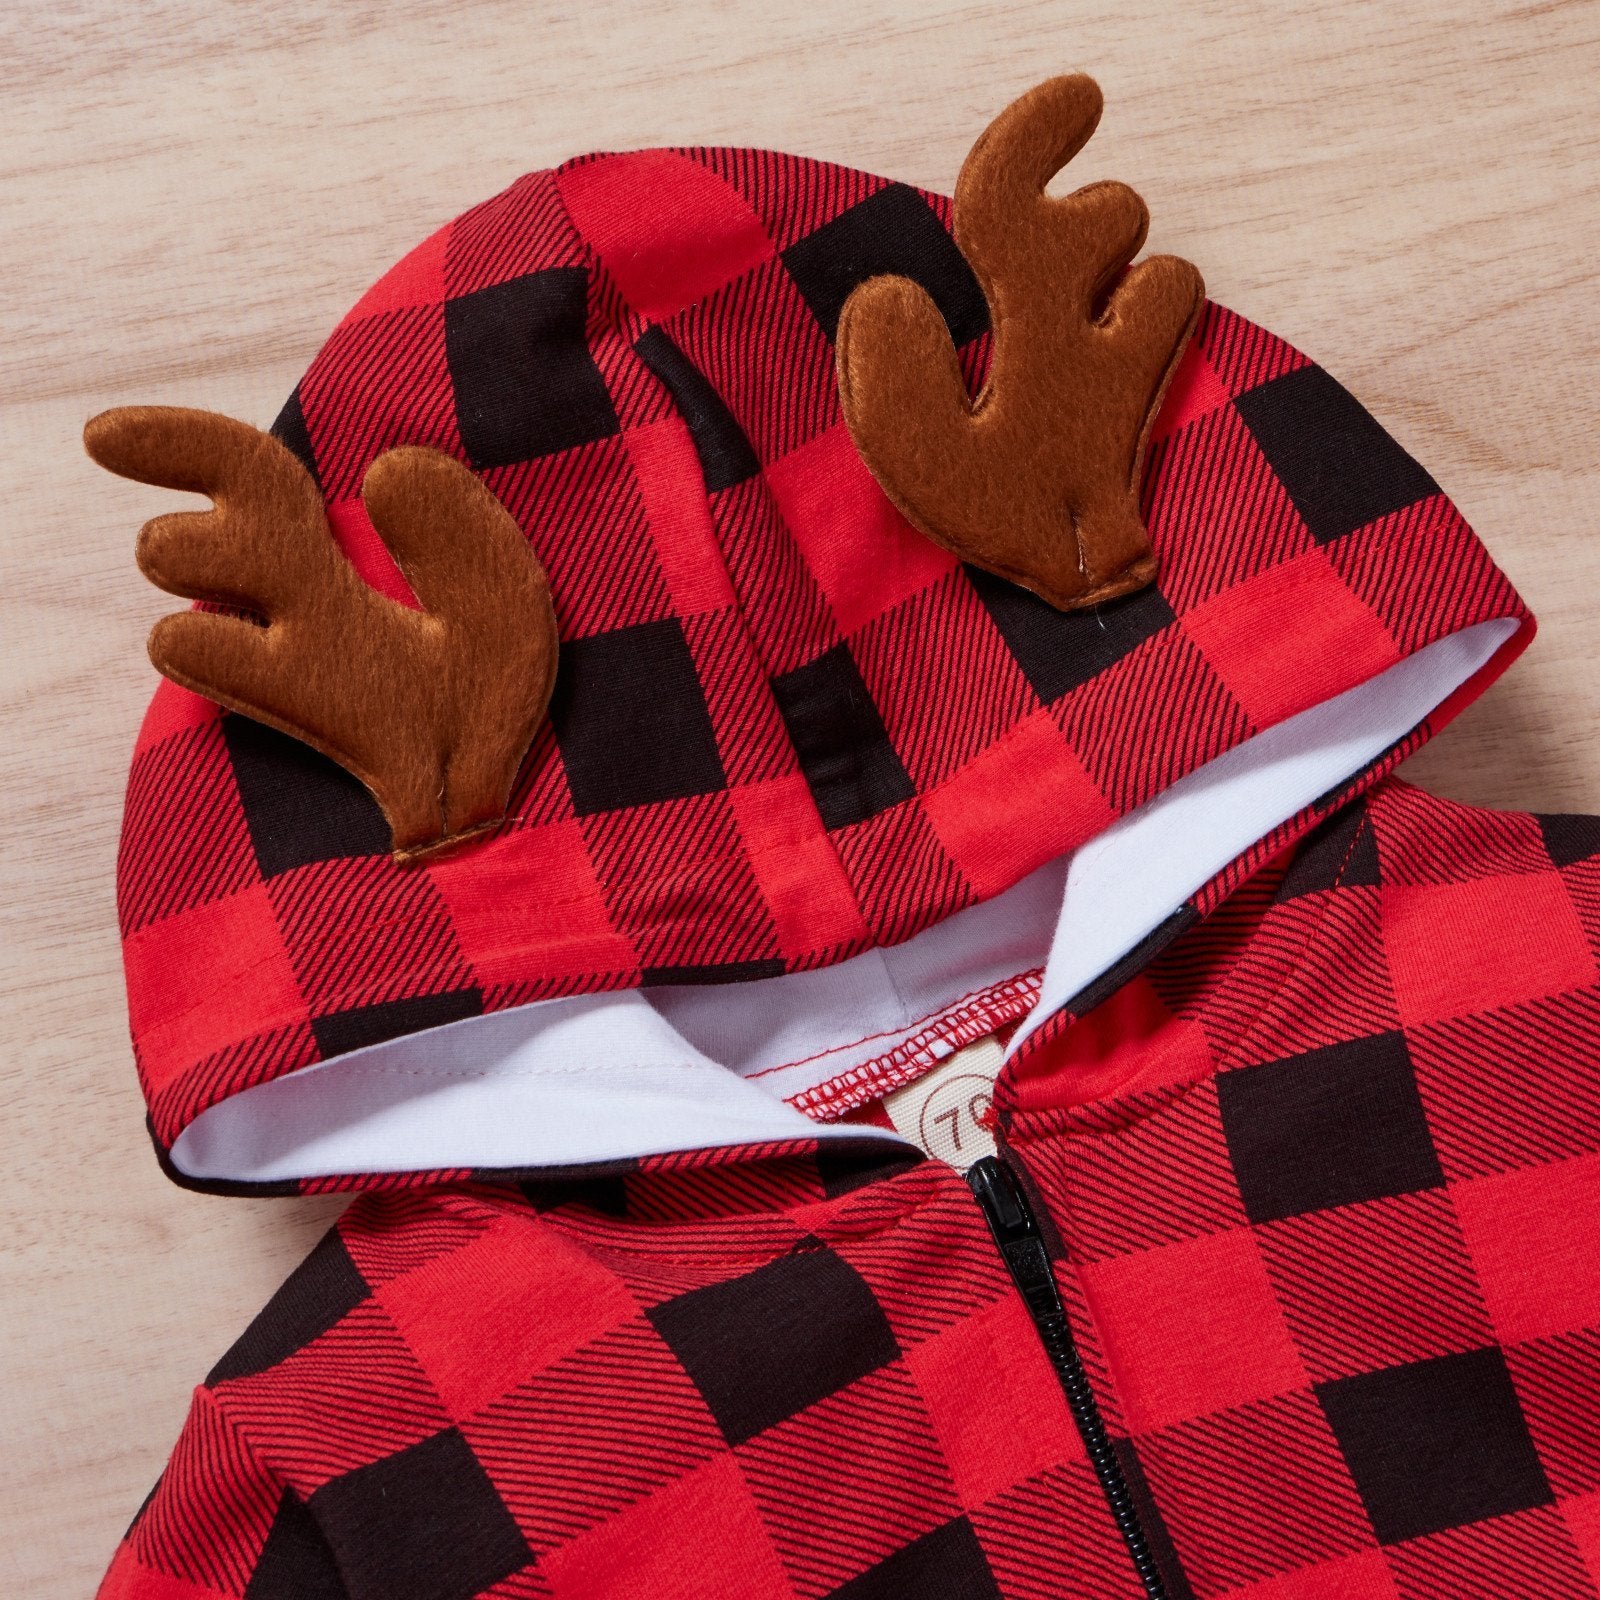 Hot selling cotton red plaid antlers jumpsuit wholesale